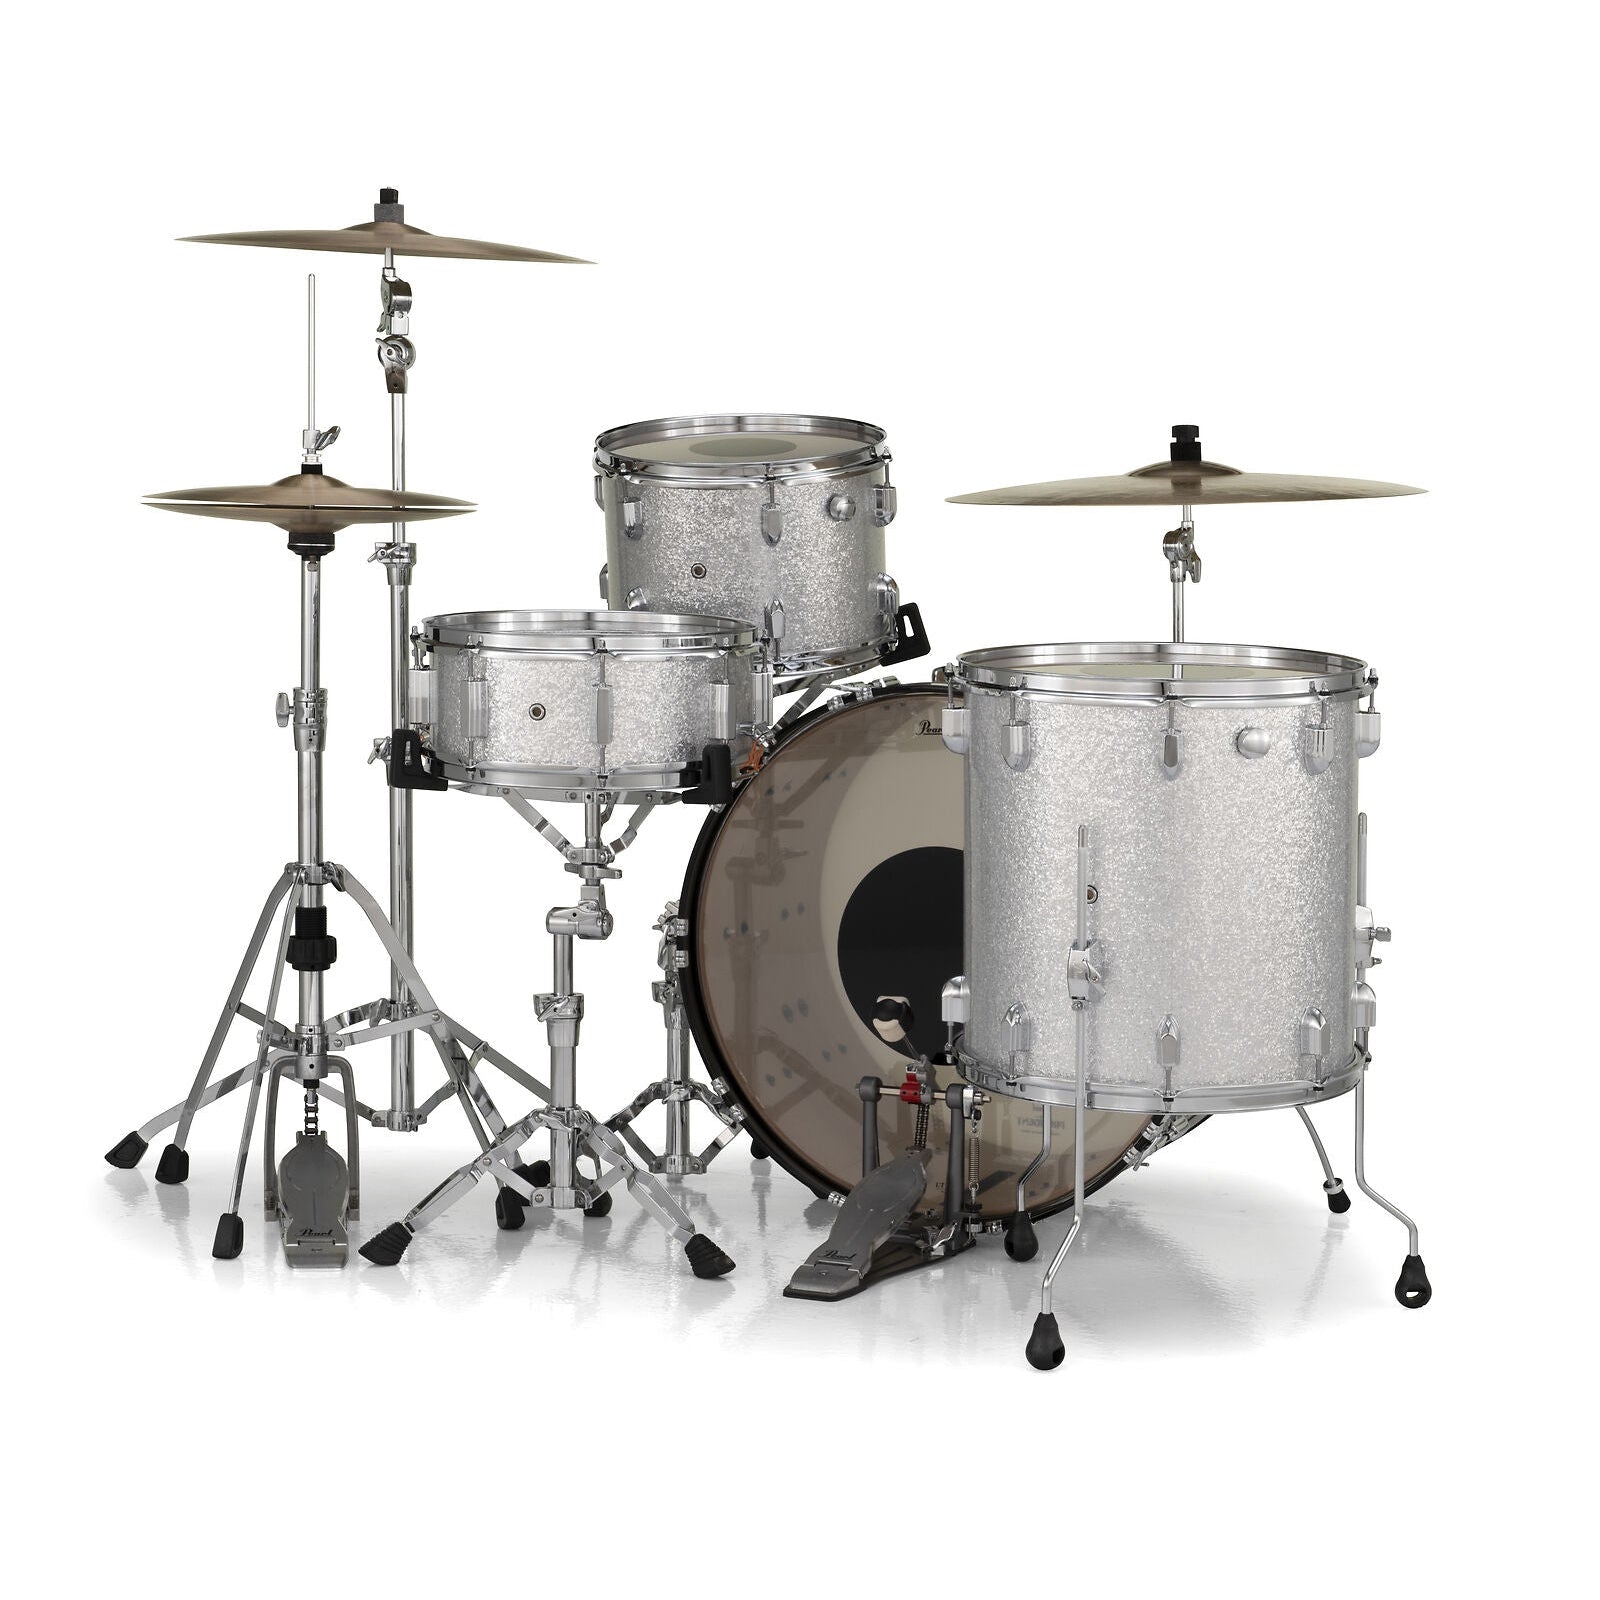 Trống Cơ Pearl President Deluxe PSD943XP/C - Việt Music